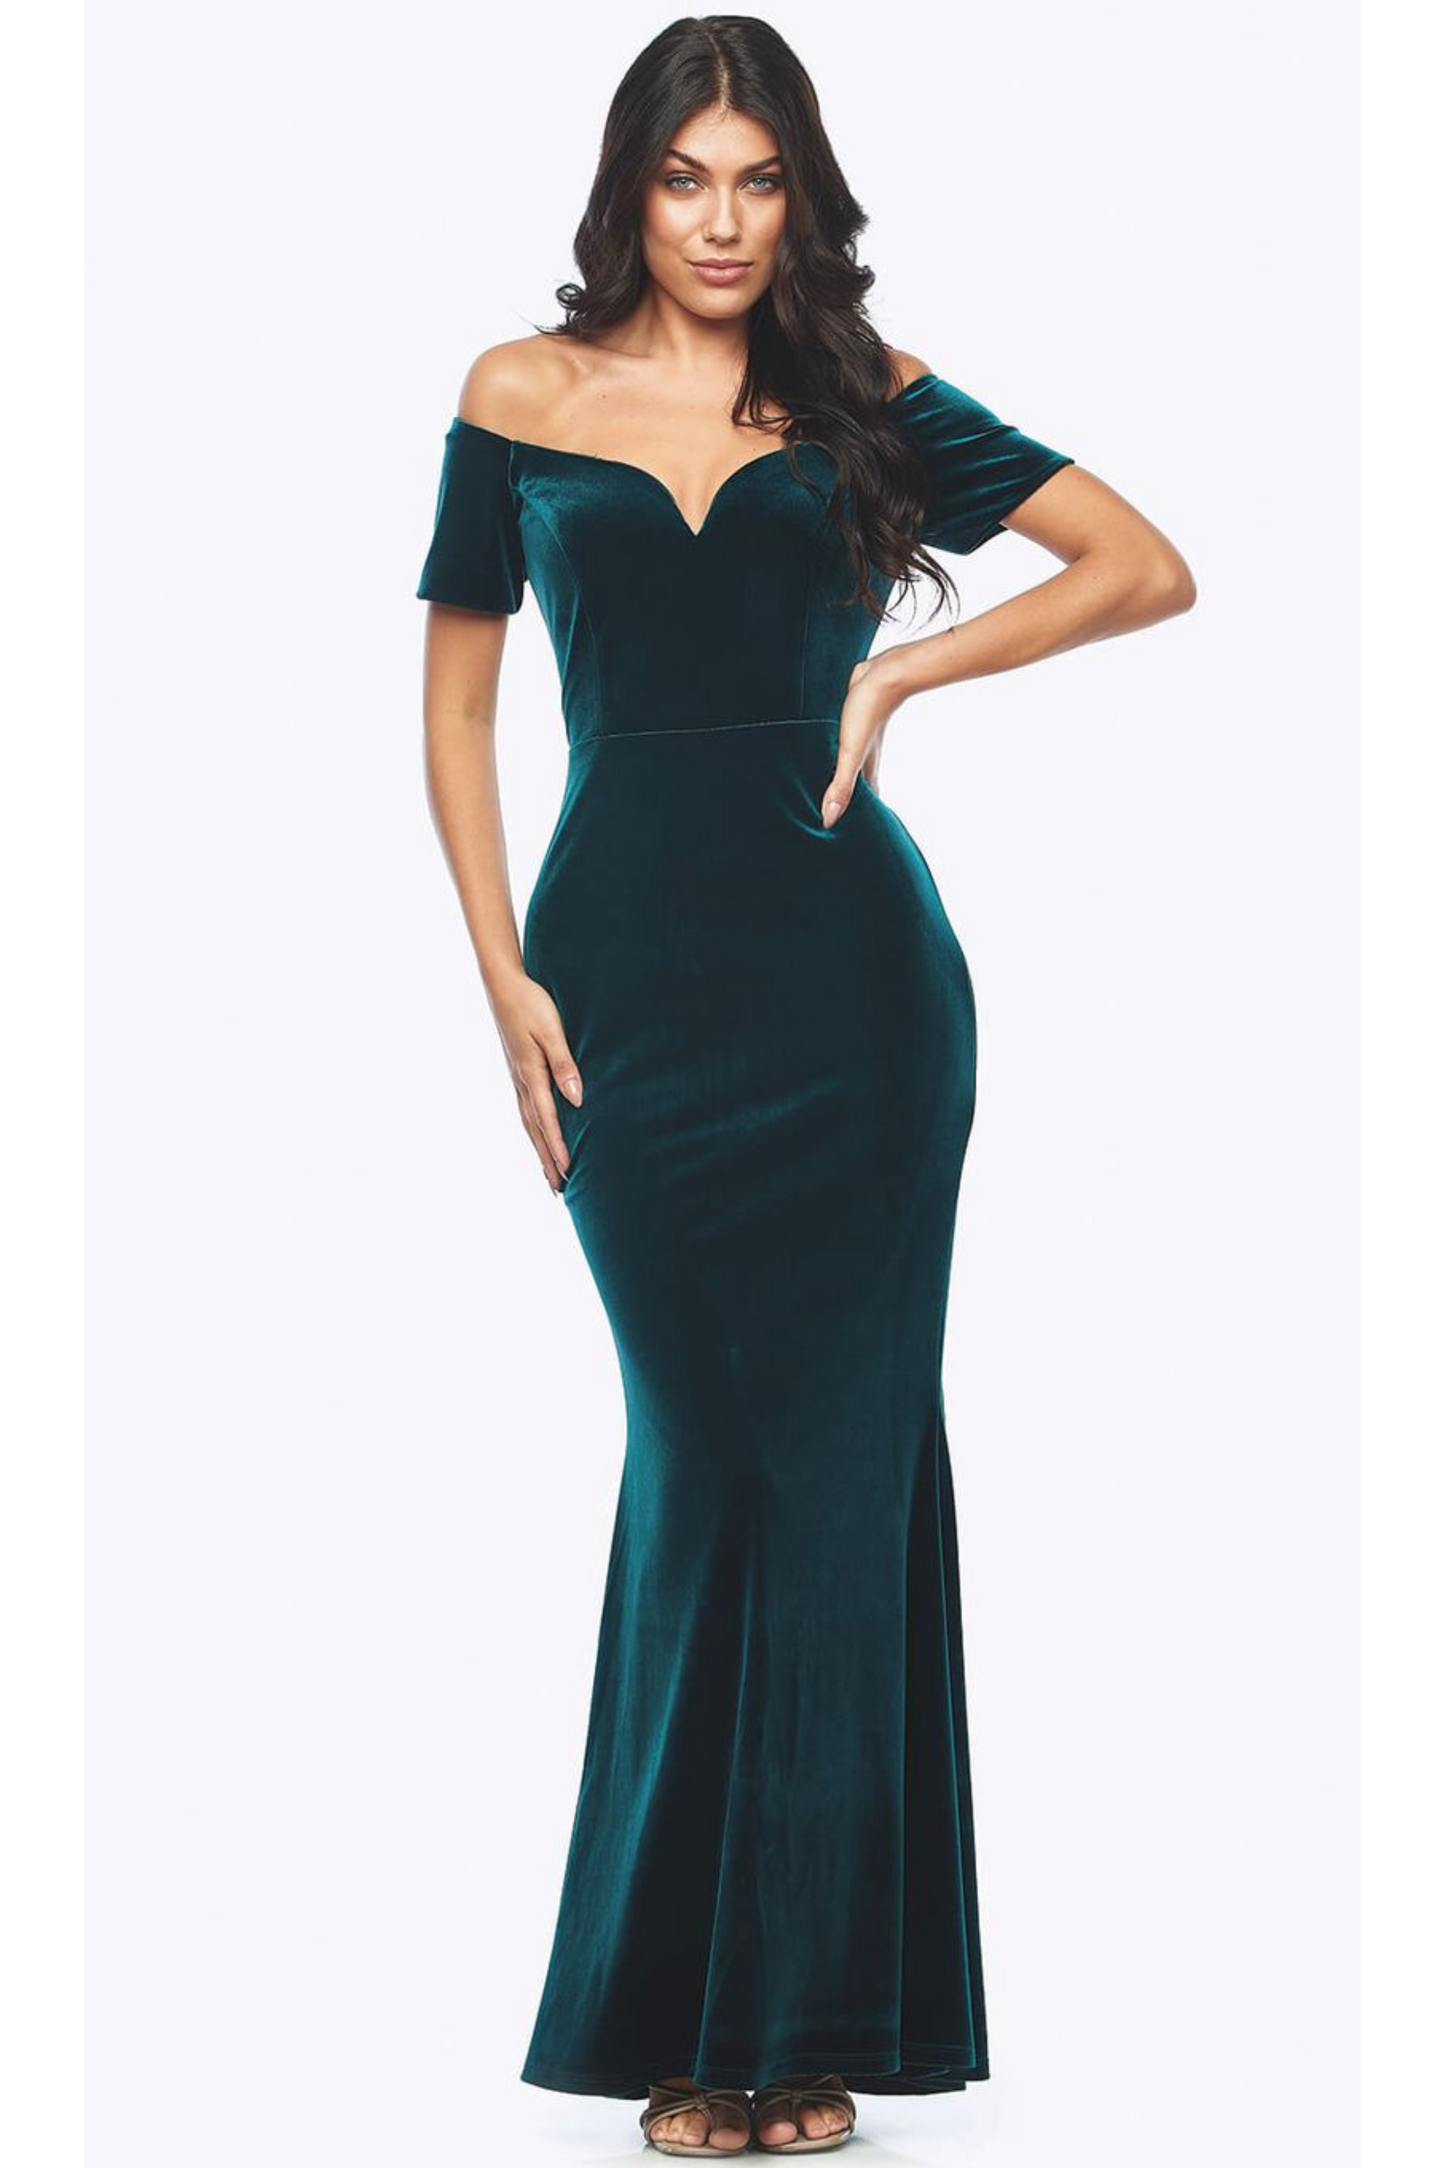 Zaliea slim fit velour dress with short sleeves and sweetheart neckline in emerald green